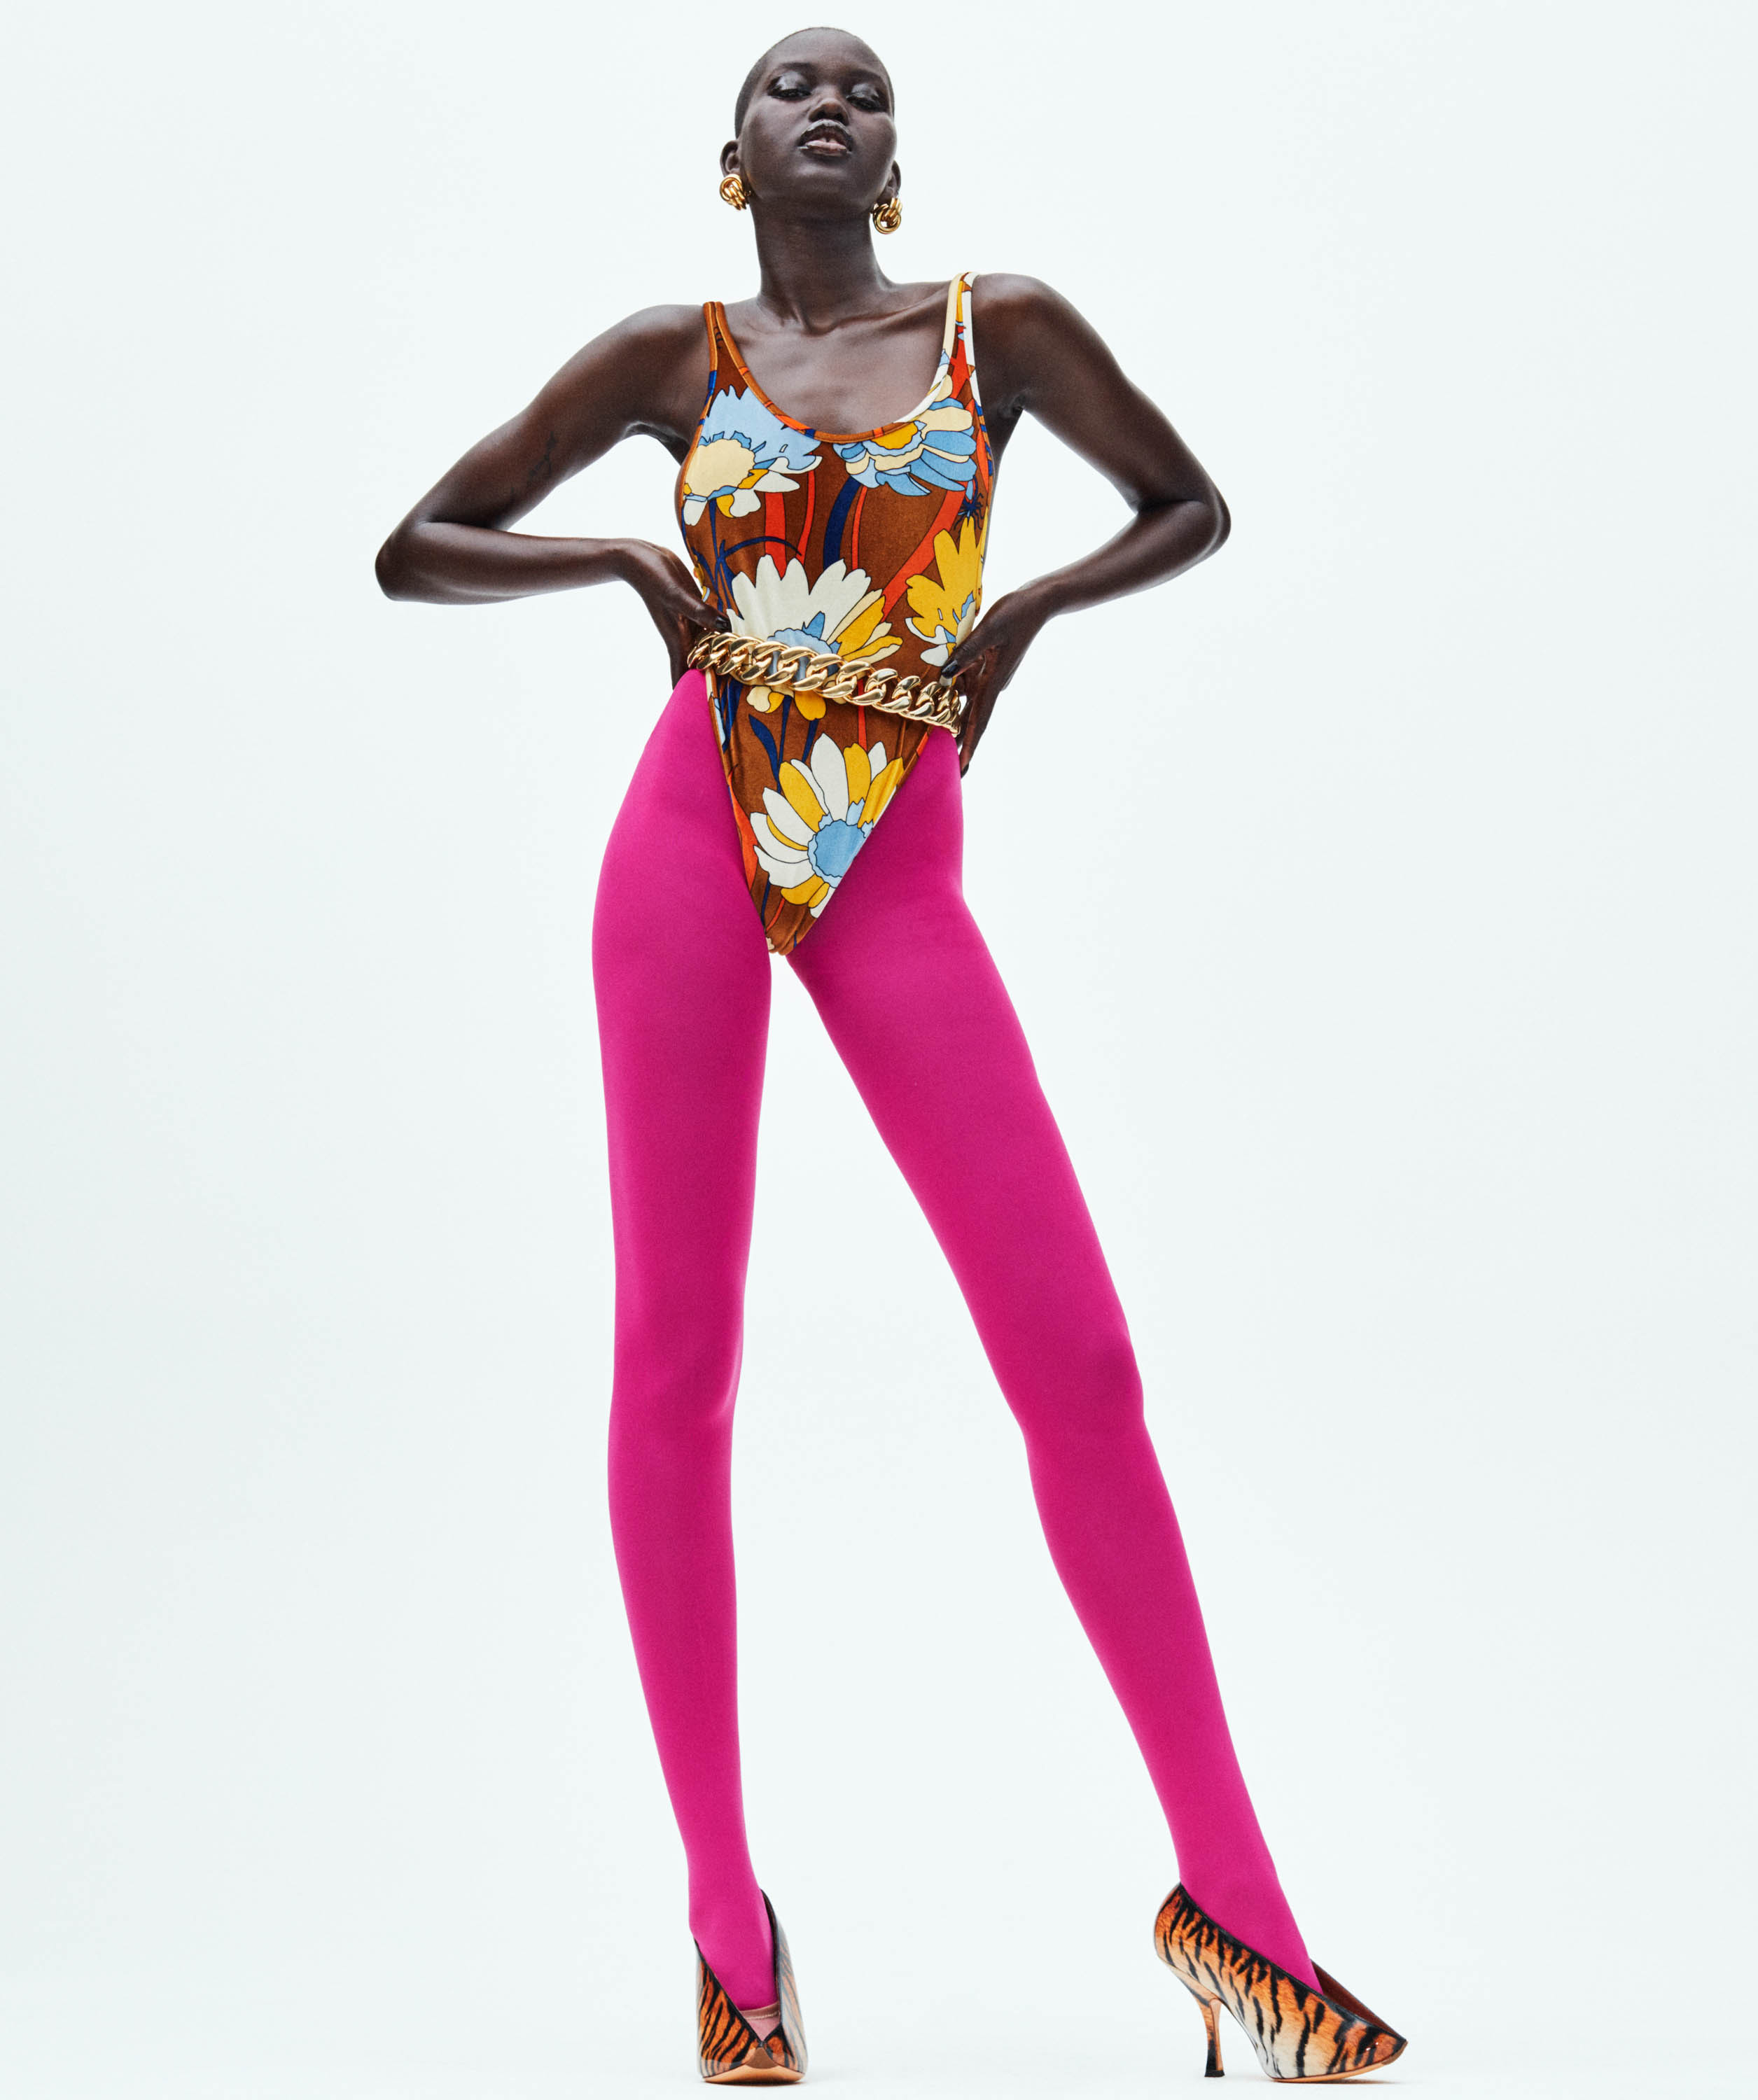 Adut Akech and her Mile Long Legs - Photo 3